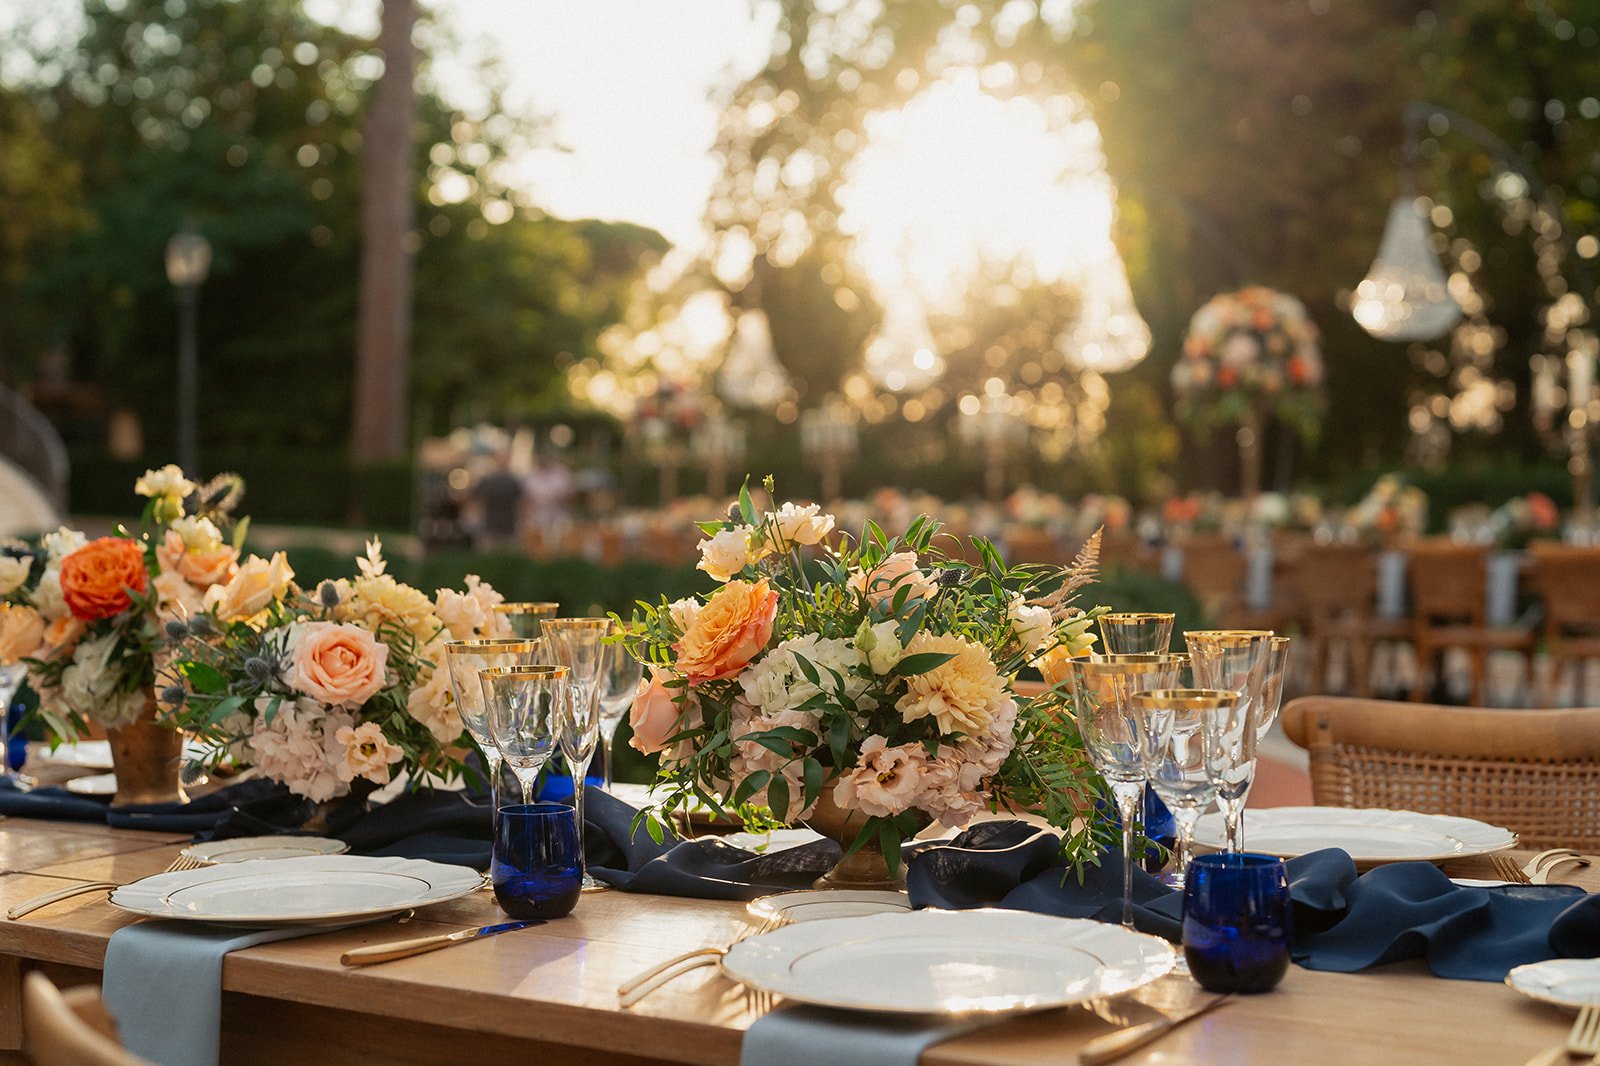 John_Pete_Wedding table with flowers at sunset .jpg